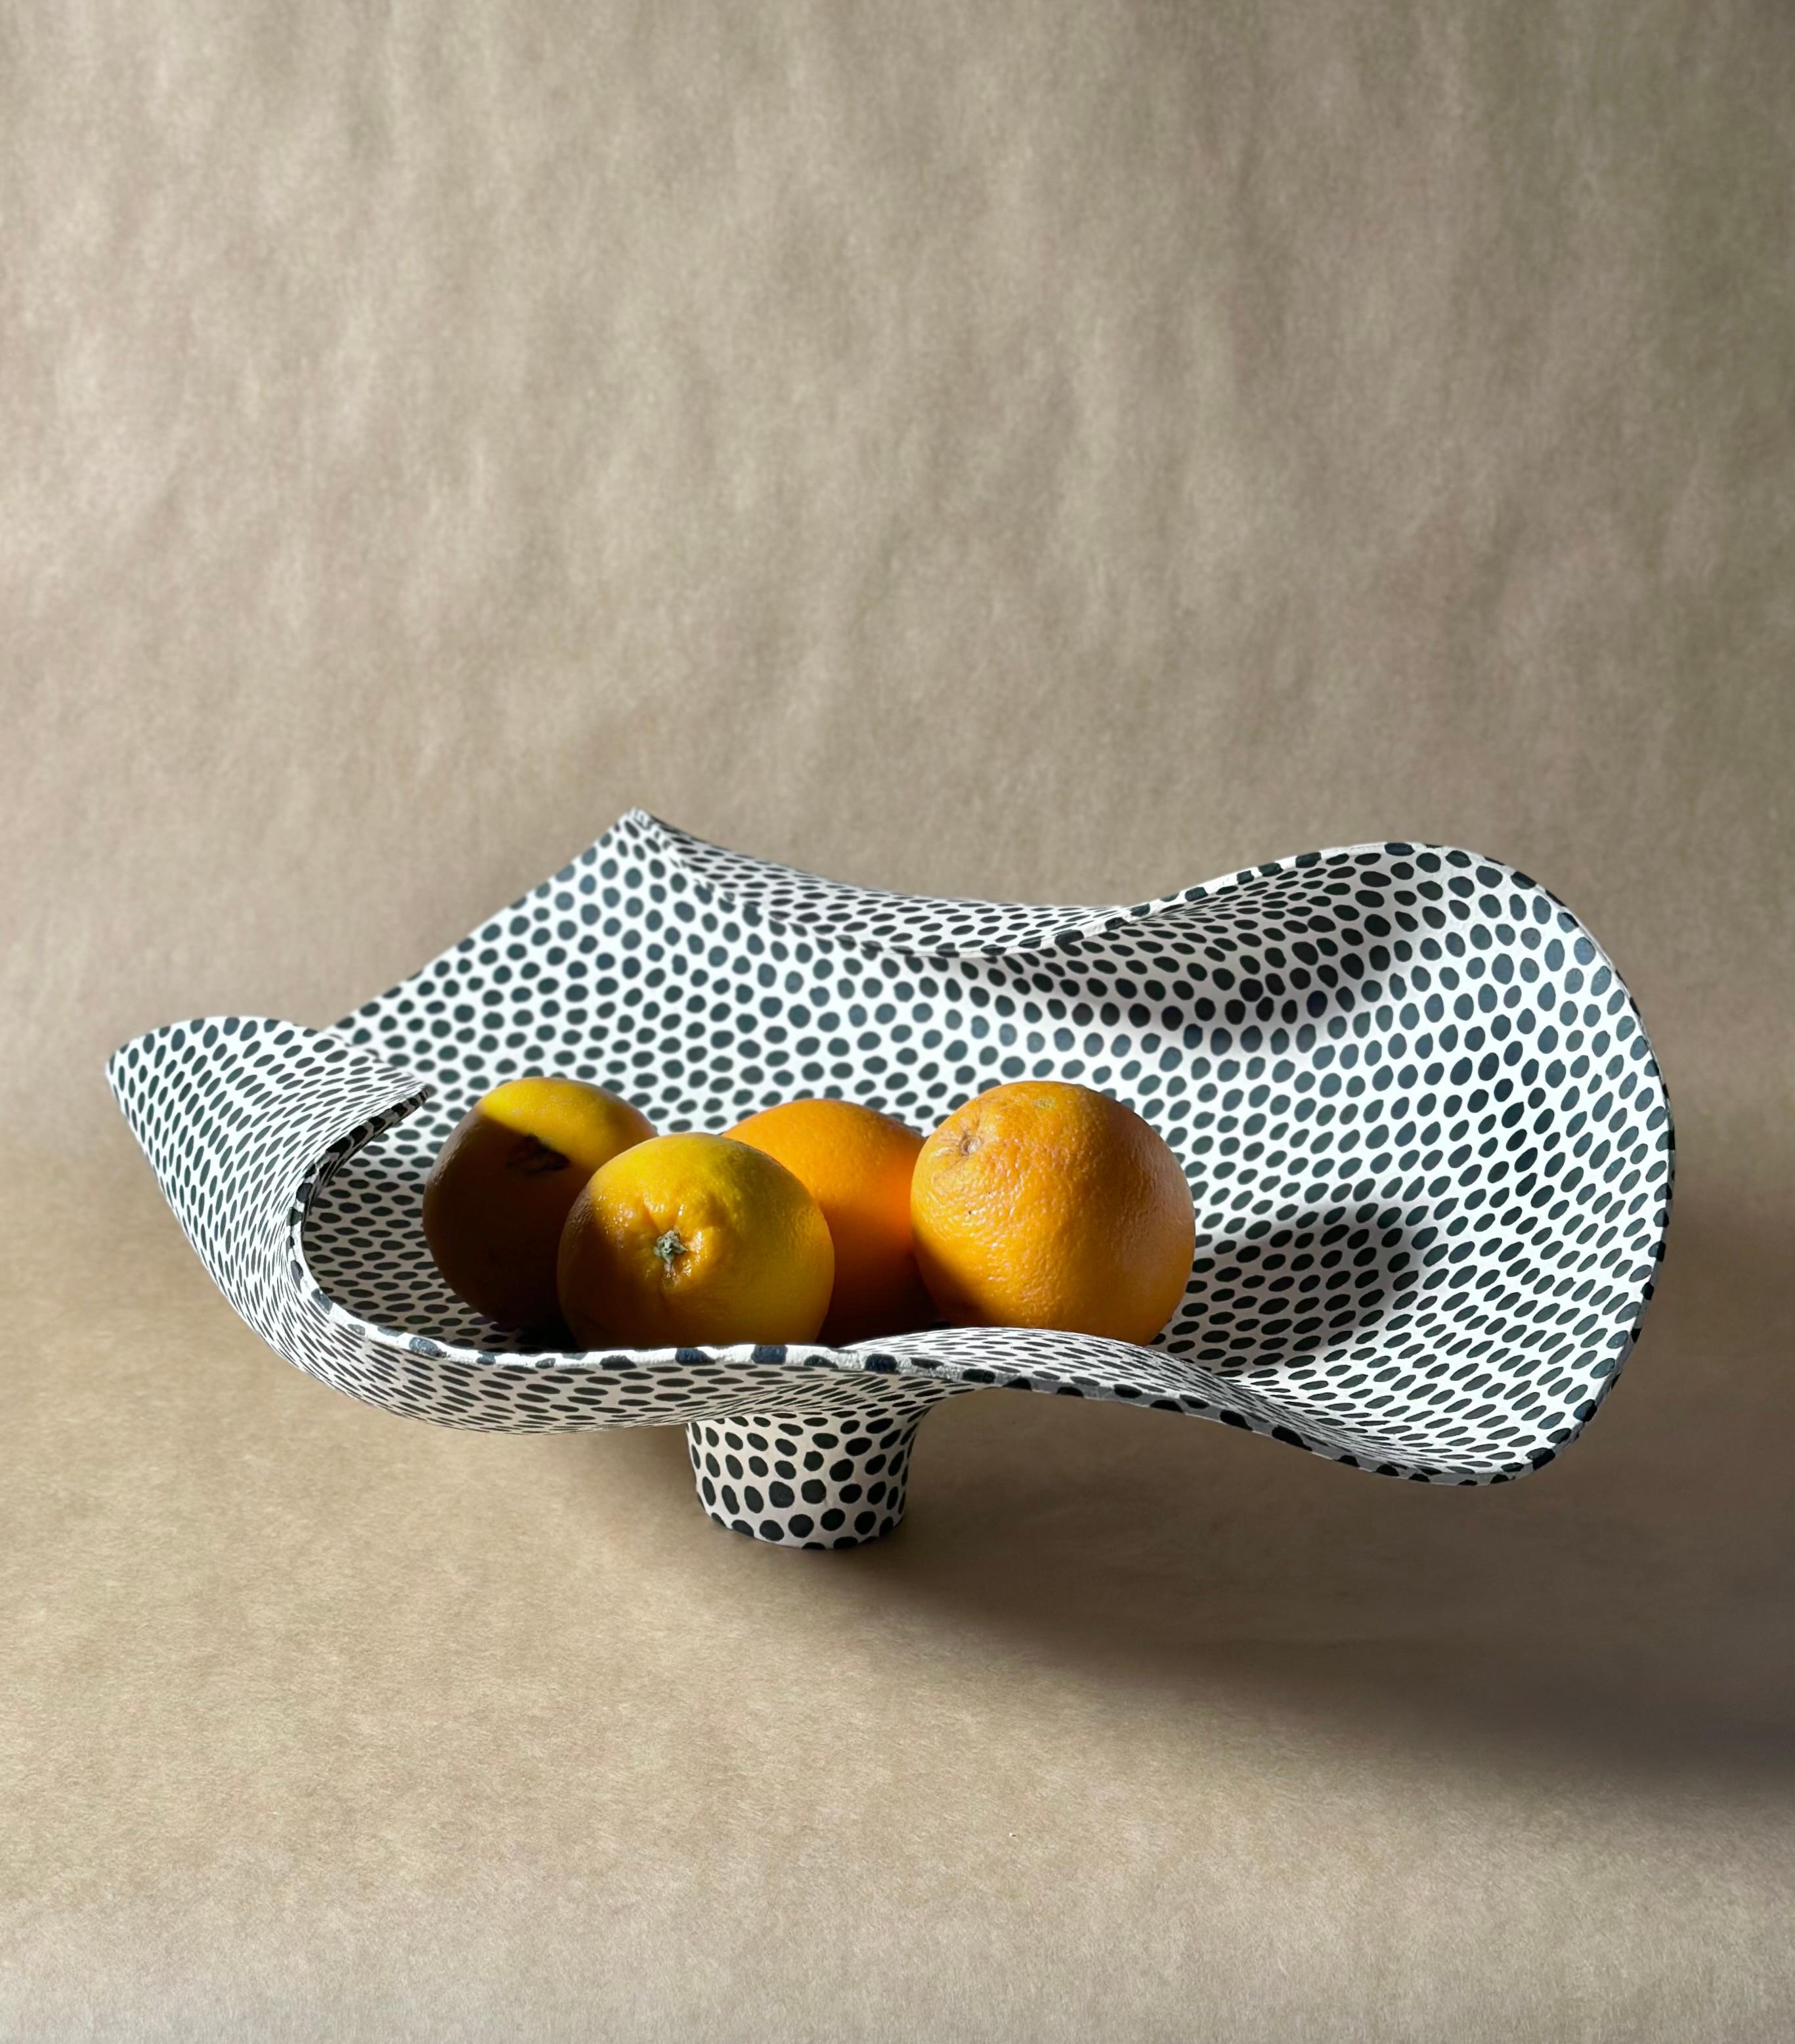 Art piece by  Norwegian ceramic artist Johanne Birkeland. Birkeland works under the artist name Jossolini. 

All her pieces are unique, and are built or thrown by hand. The decoration is also made by hand, using a black, matte glaze. She works